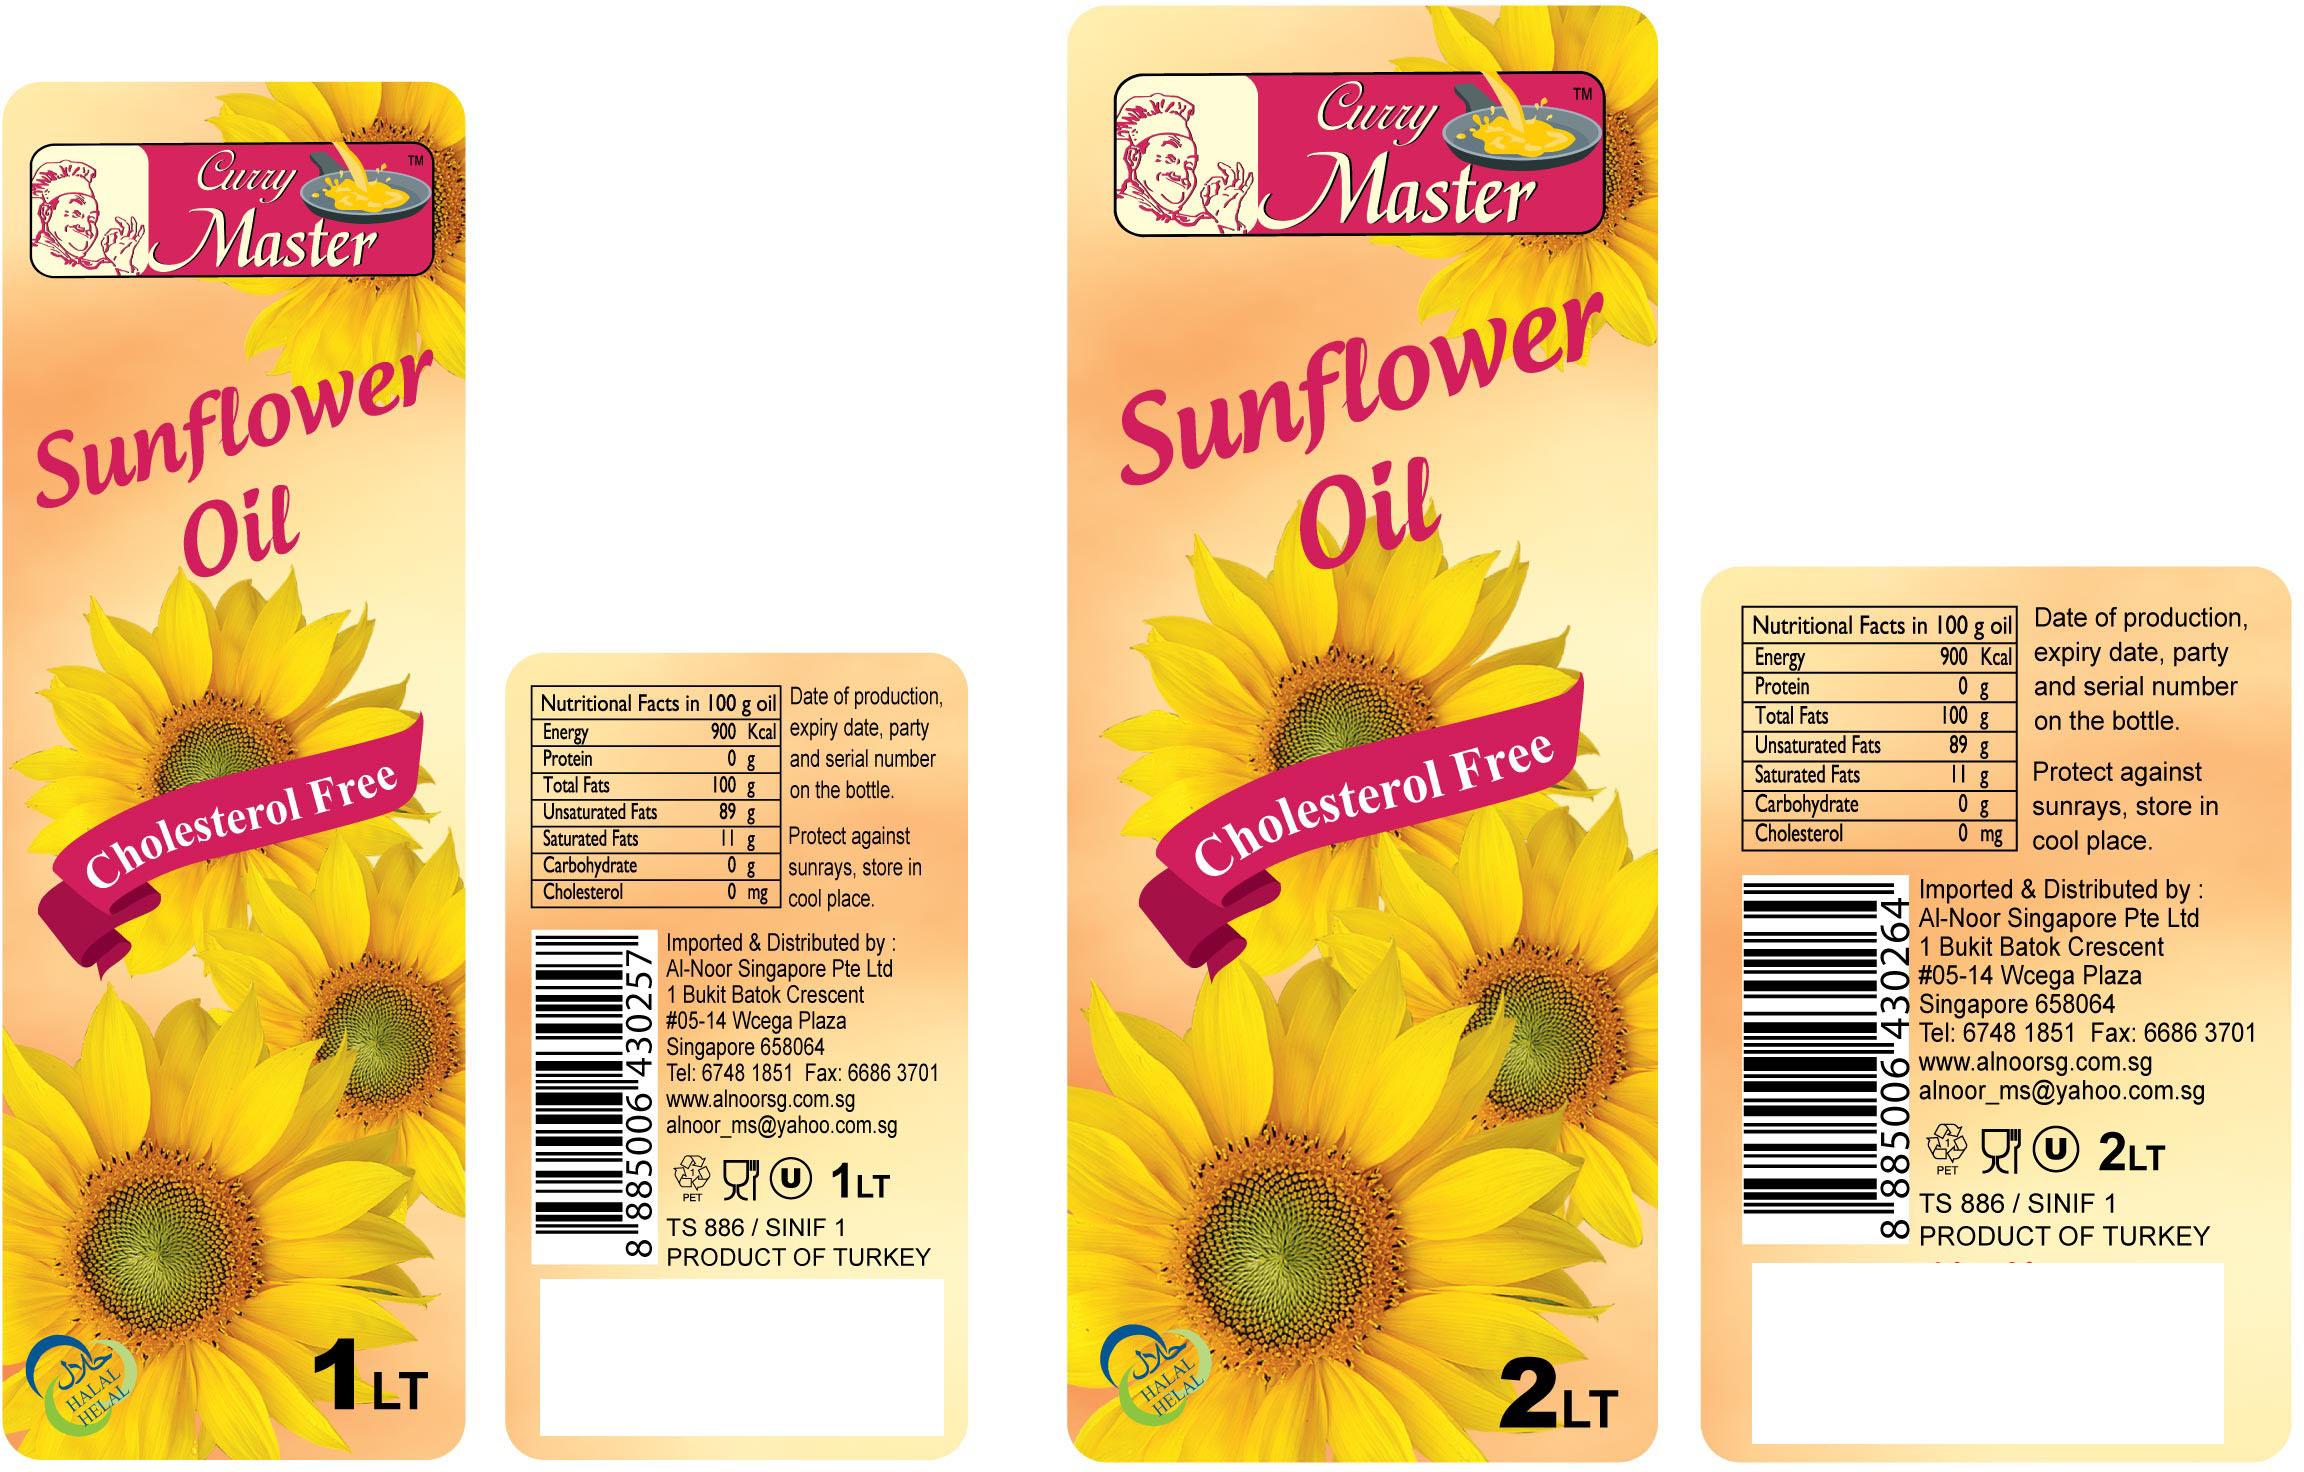 Curry Master Sunflower Oil